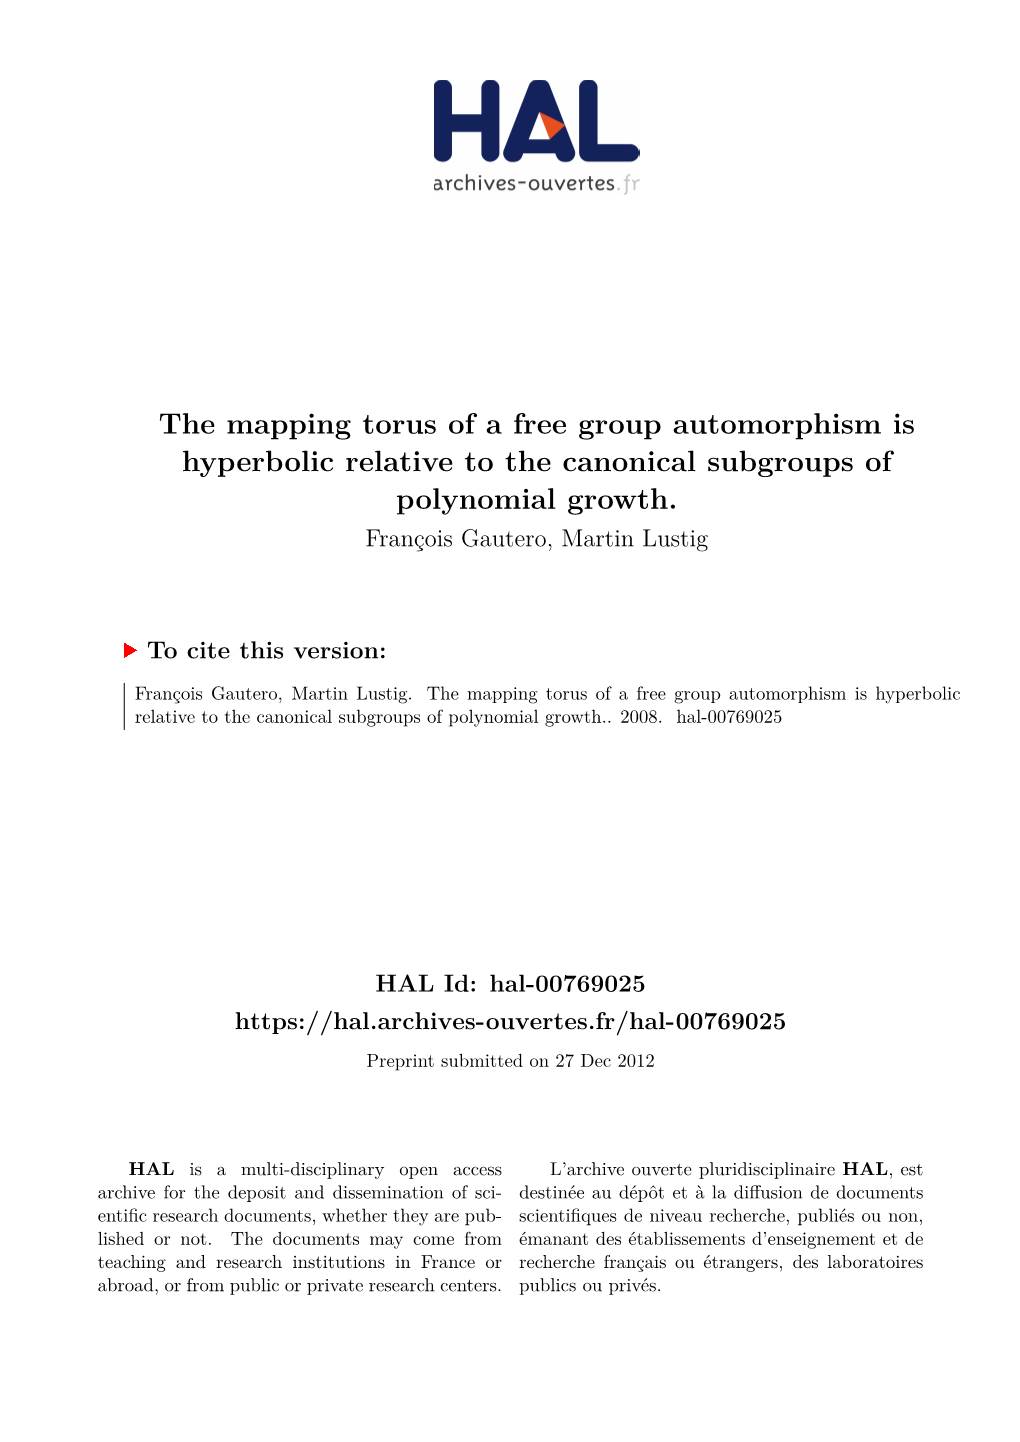 The Mapping Torus of a Free Group Automorphism Is Hyperbolic Relative to the Canonical Subgroups of Polynomial Growth